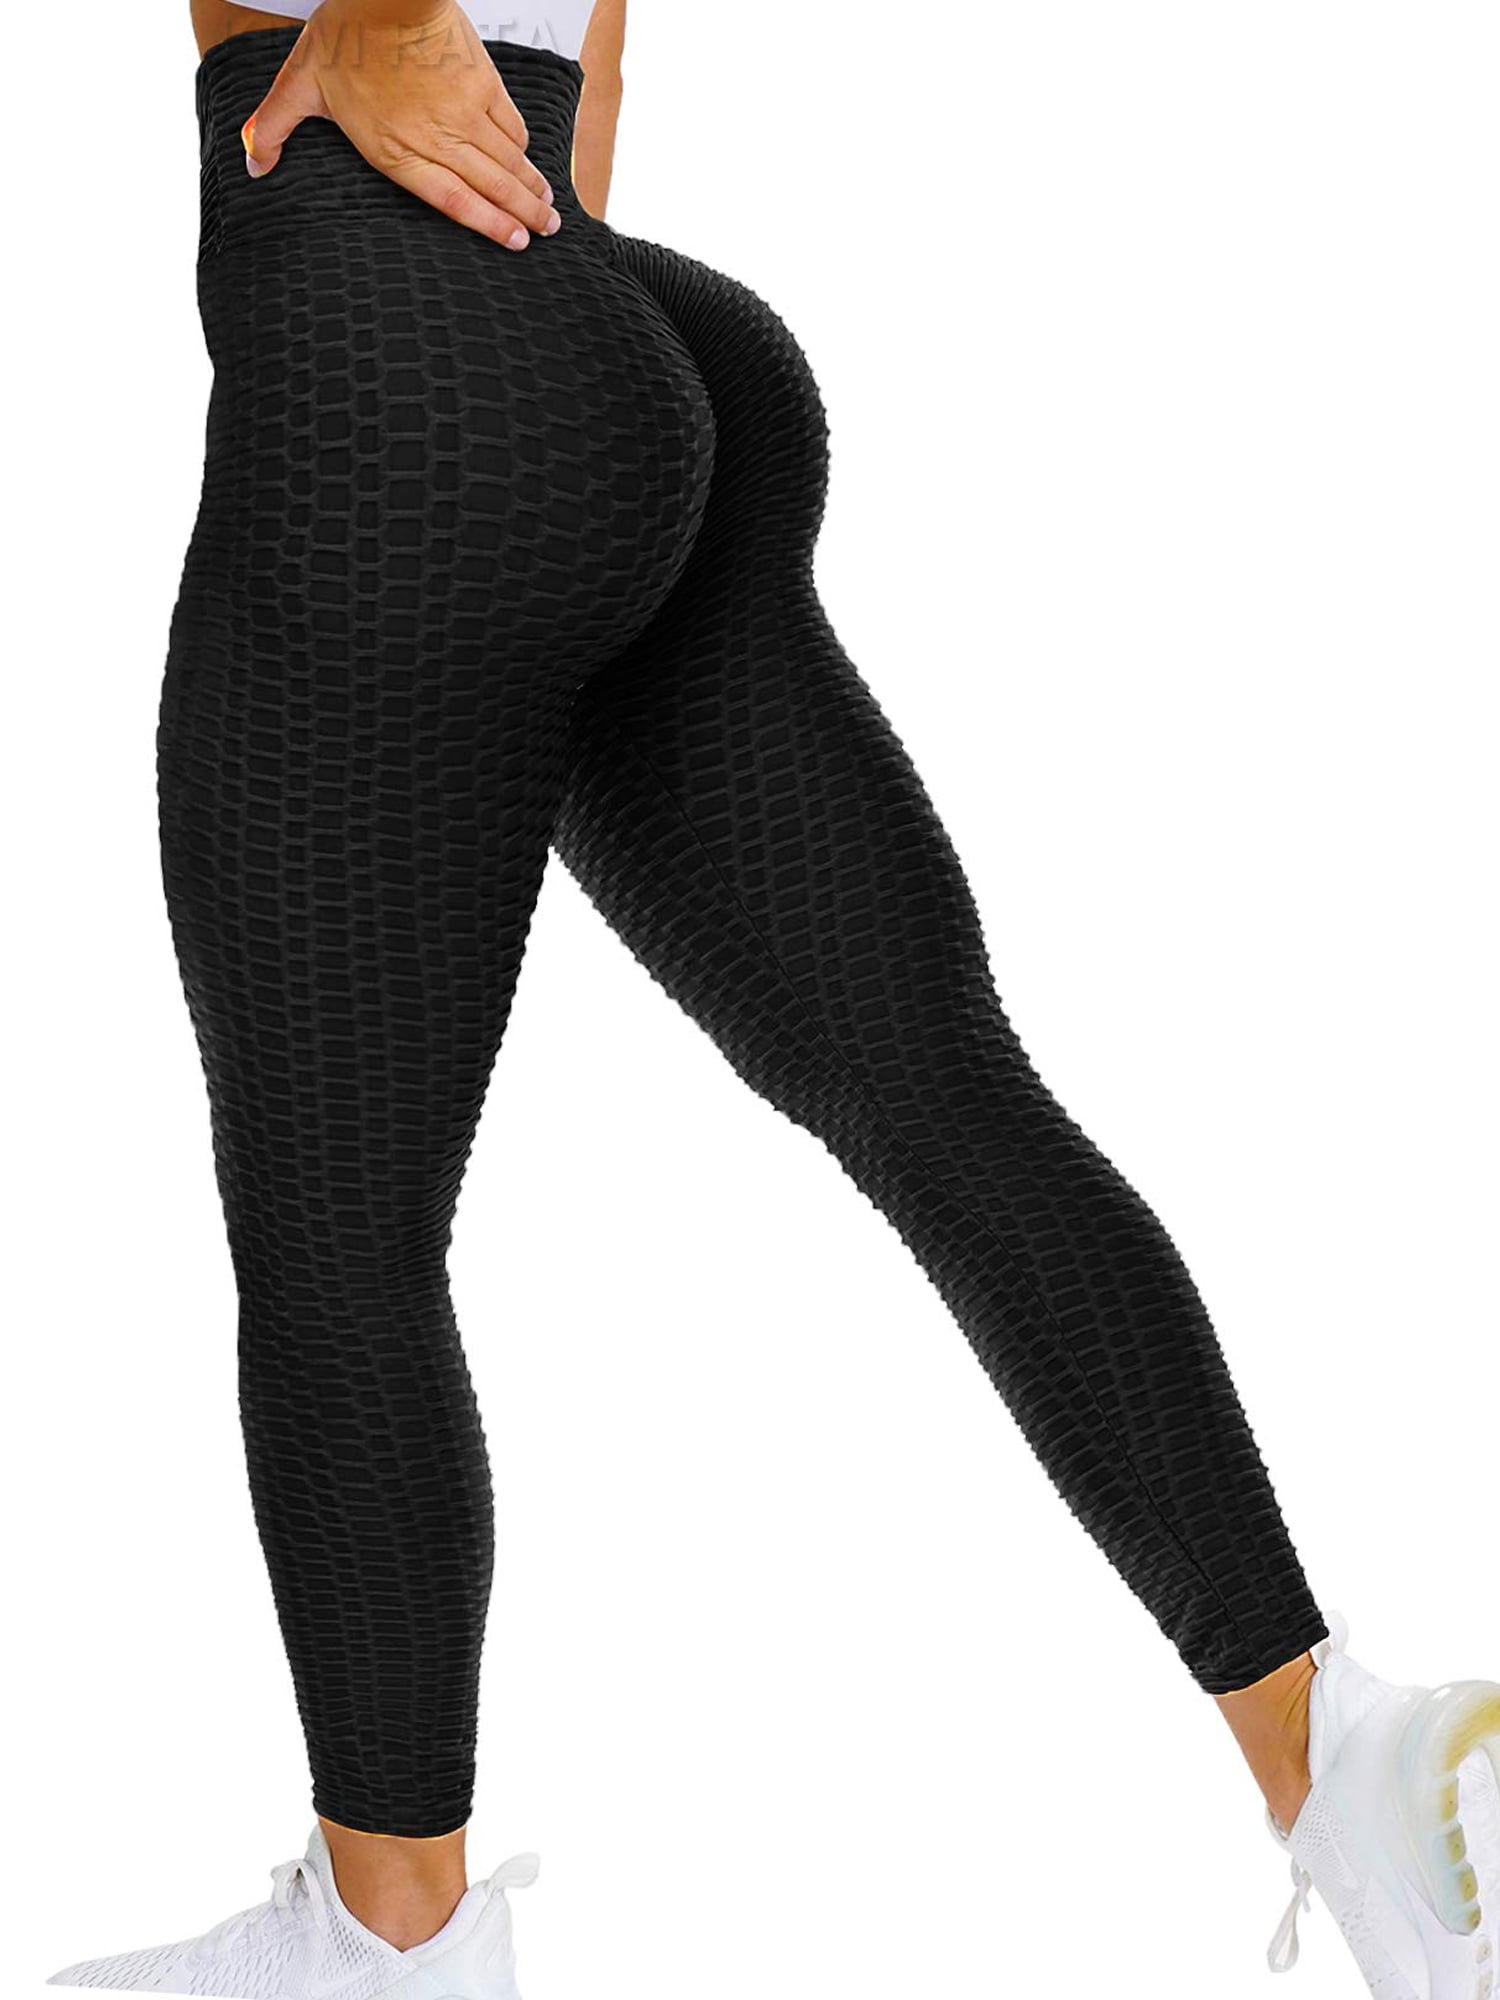 KIWI RATA Womens High Waist Gym Leggings Scrunch Butt Lift Yoga Pants with Pockets Tummy Control Workout Running Tights Stretch Trousers